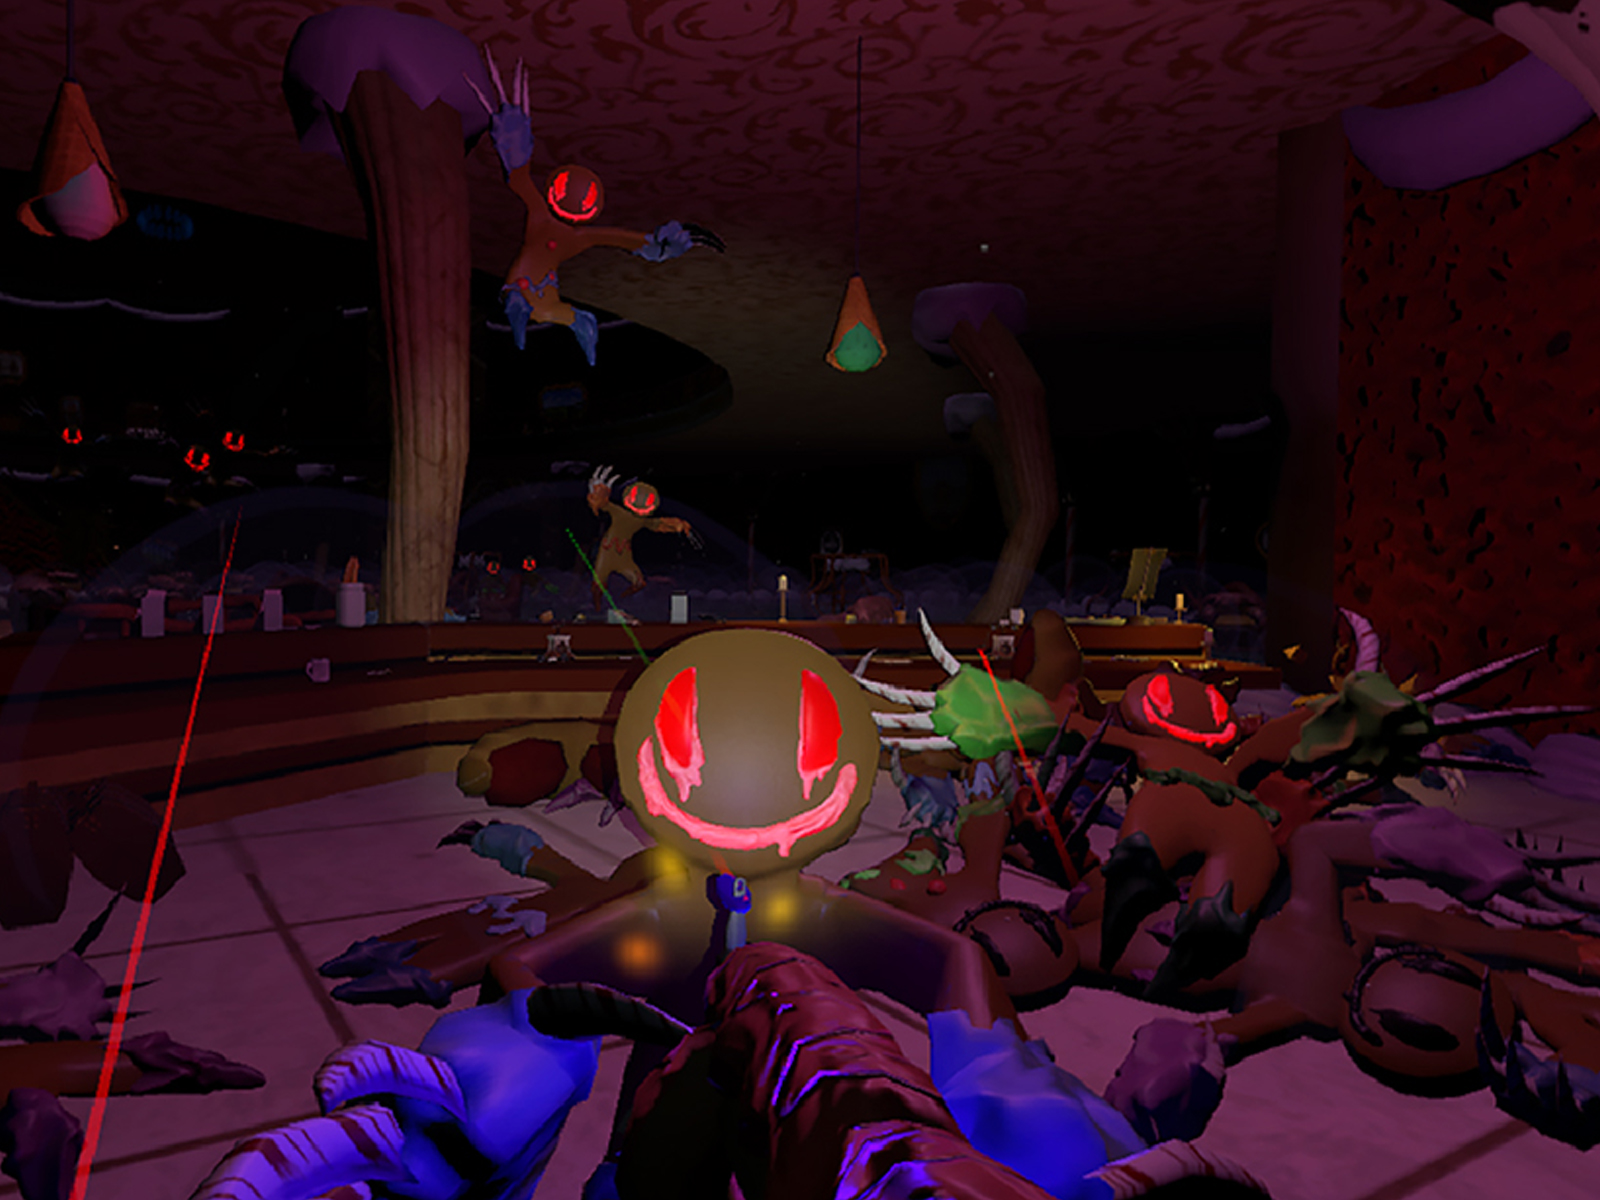 Evil gingerbread men coming out of the darkness in a screenshot from DigiPen student game Night of the Living Bread